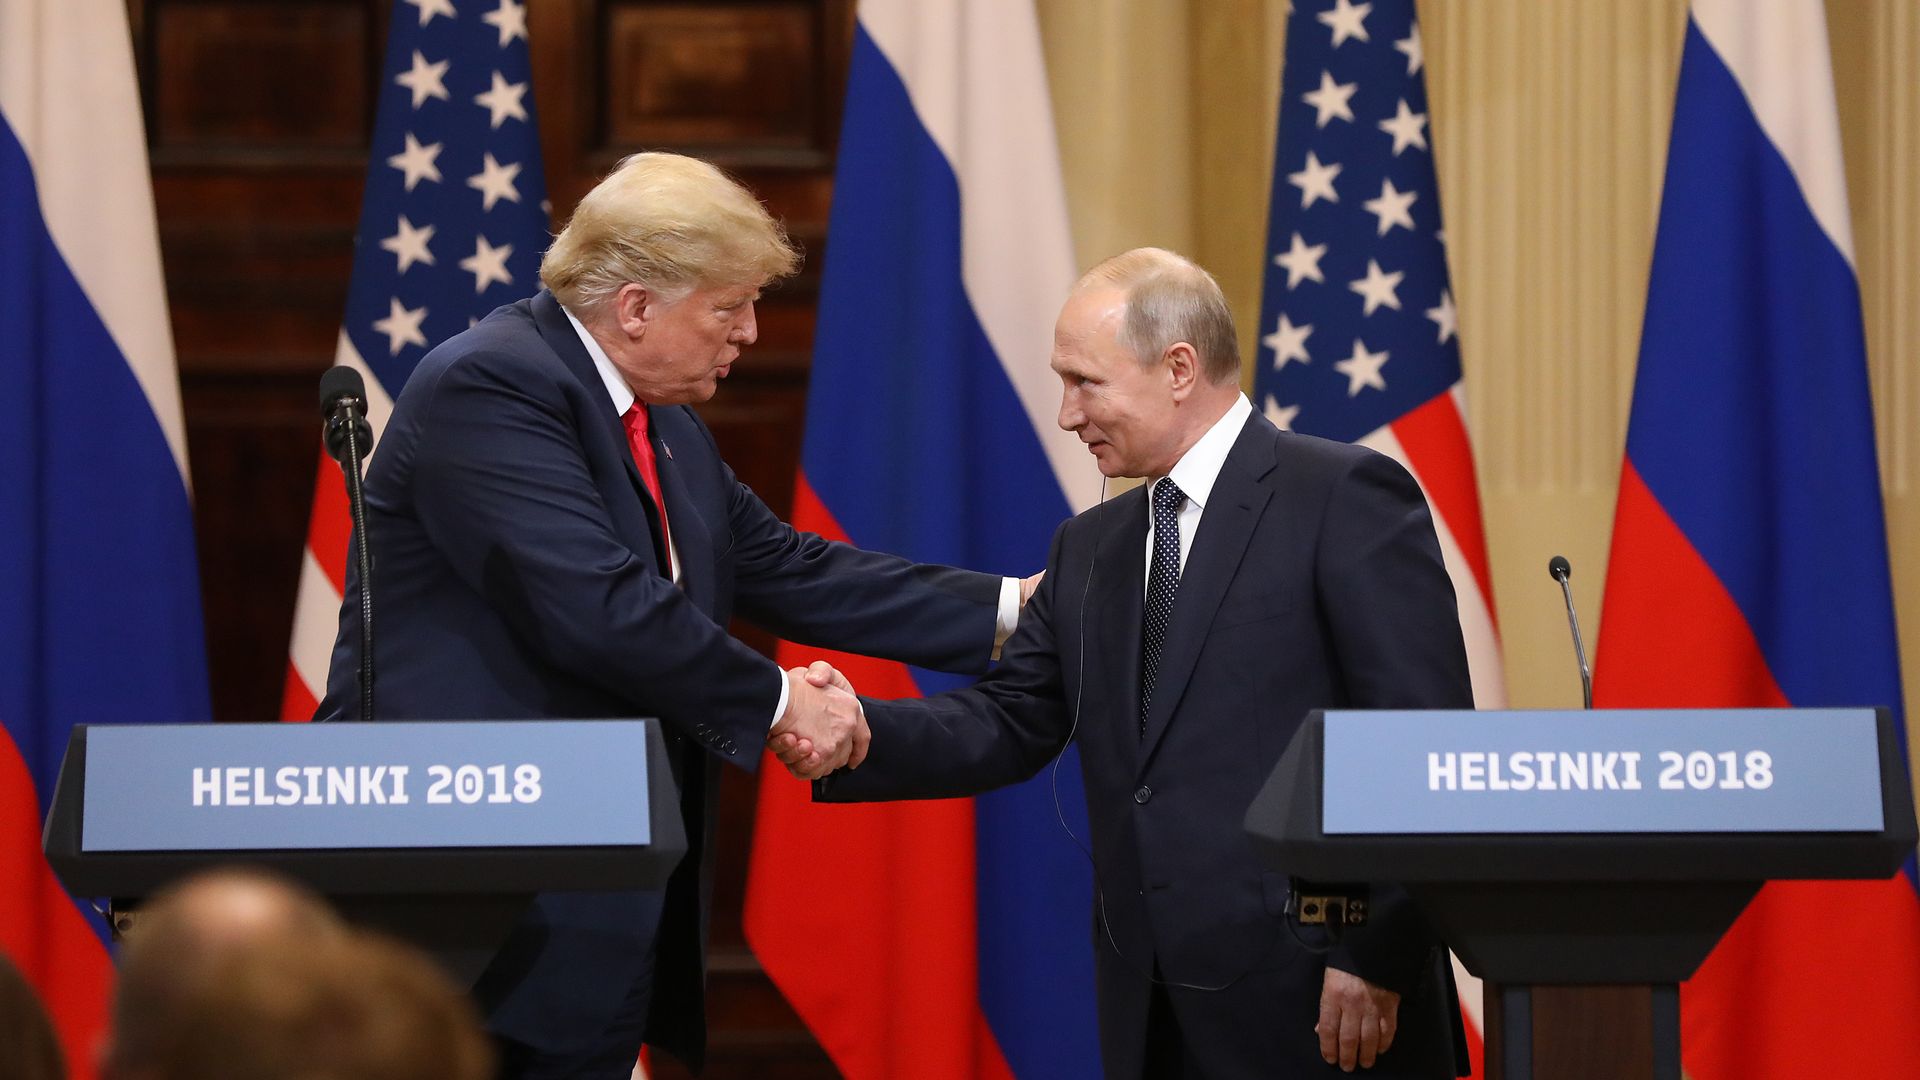 Photo of Donald Trump and Vladimir Putin shaking hands on a stage in front of people